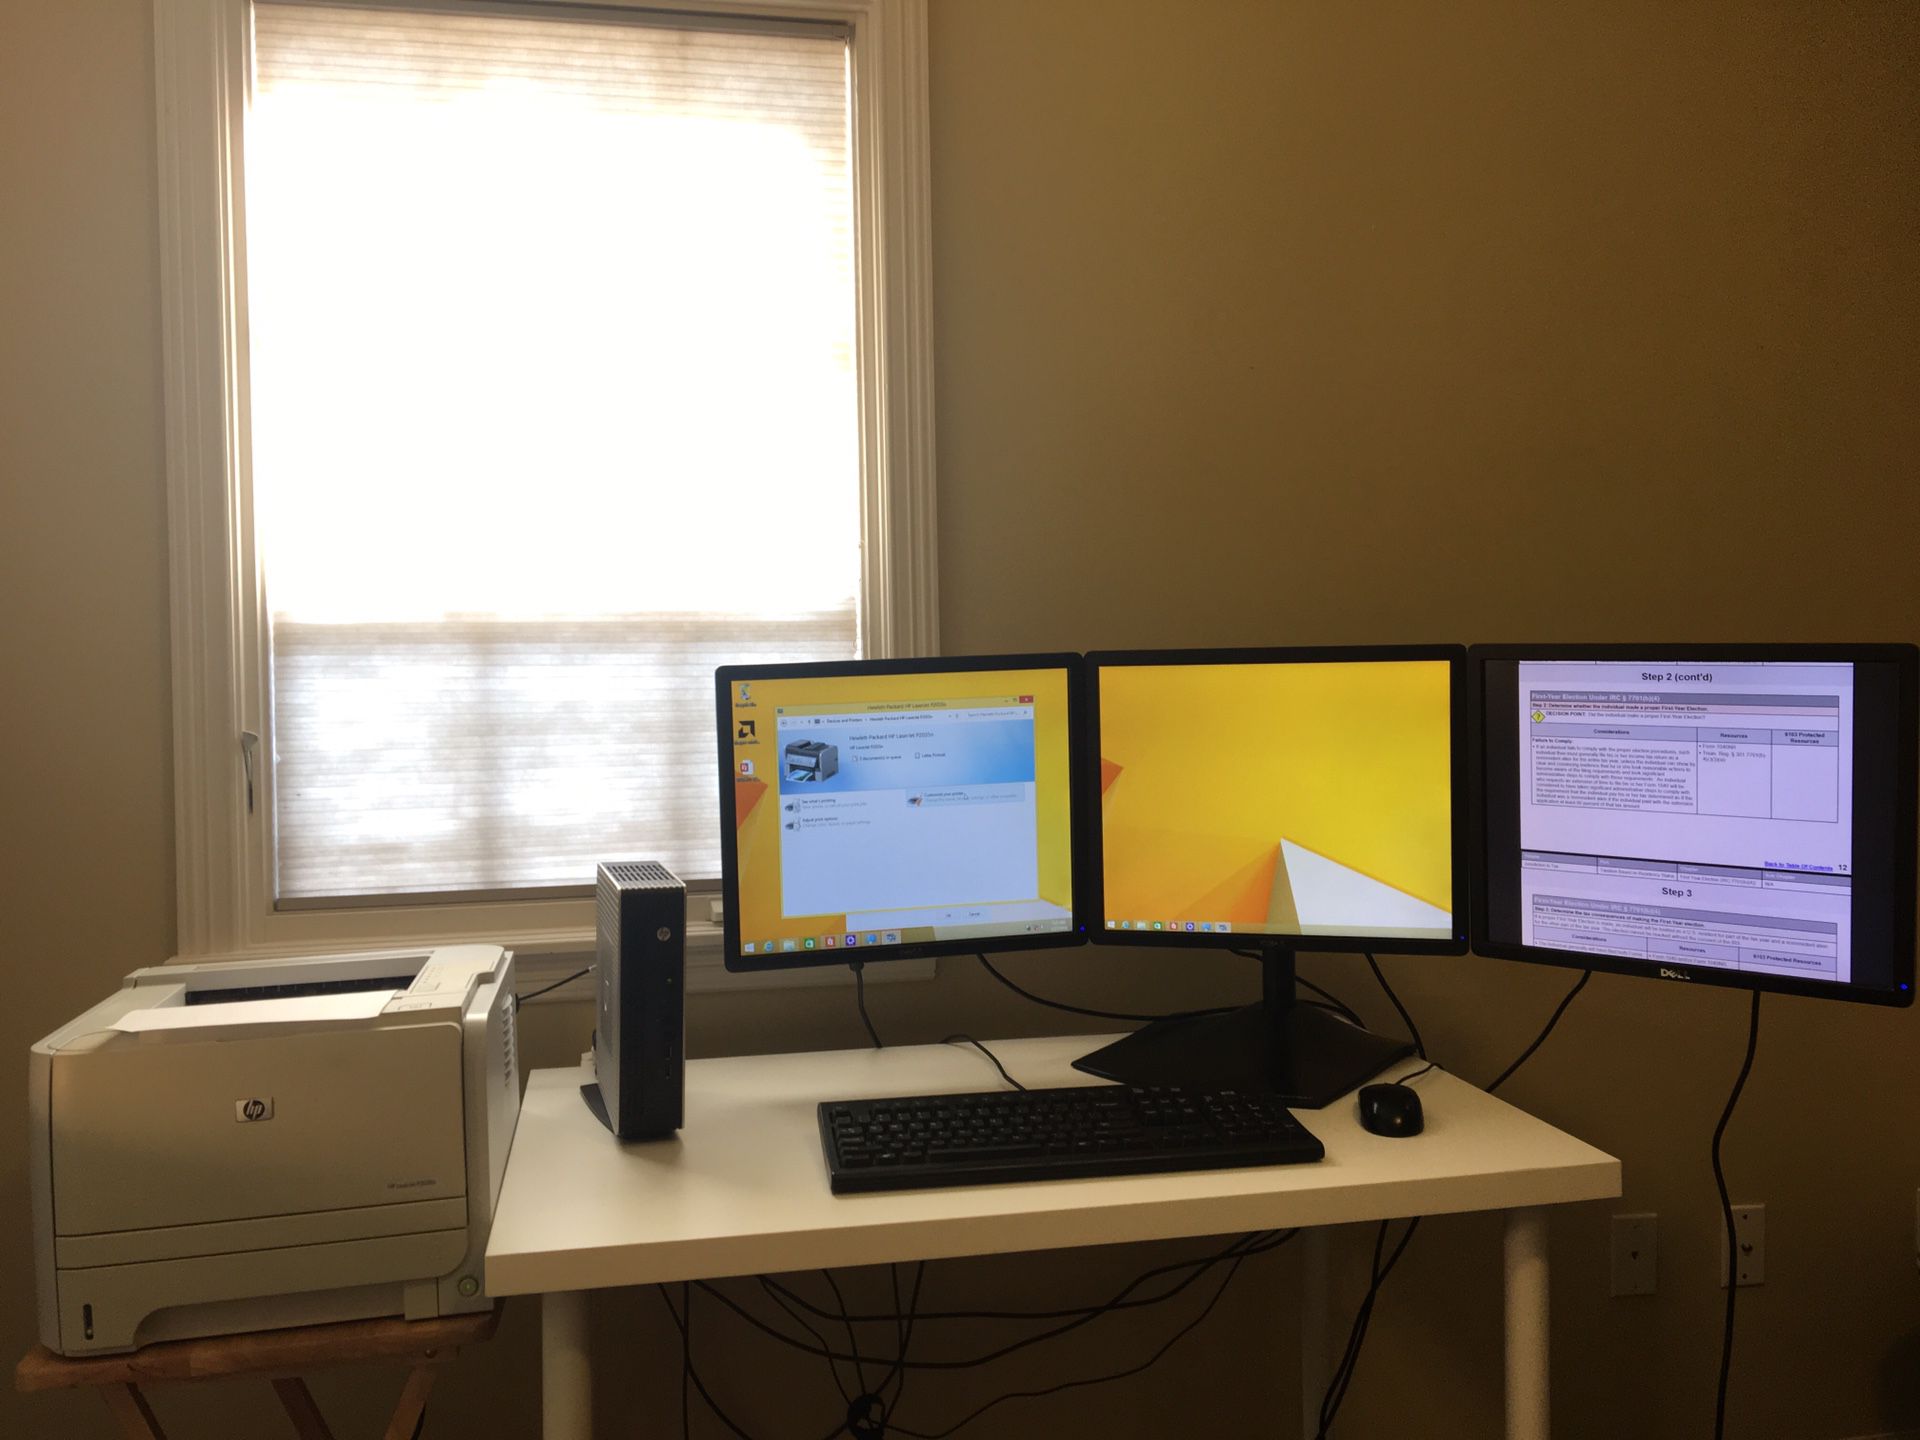 Triple Monitor Workstation & Laser Jet (Costs at least $500 if buying online)